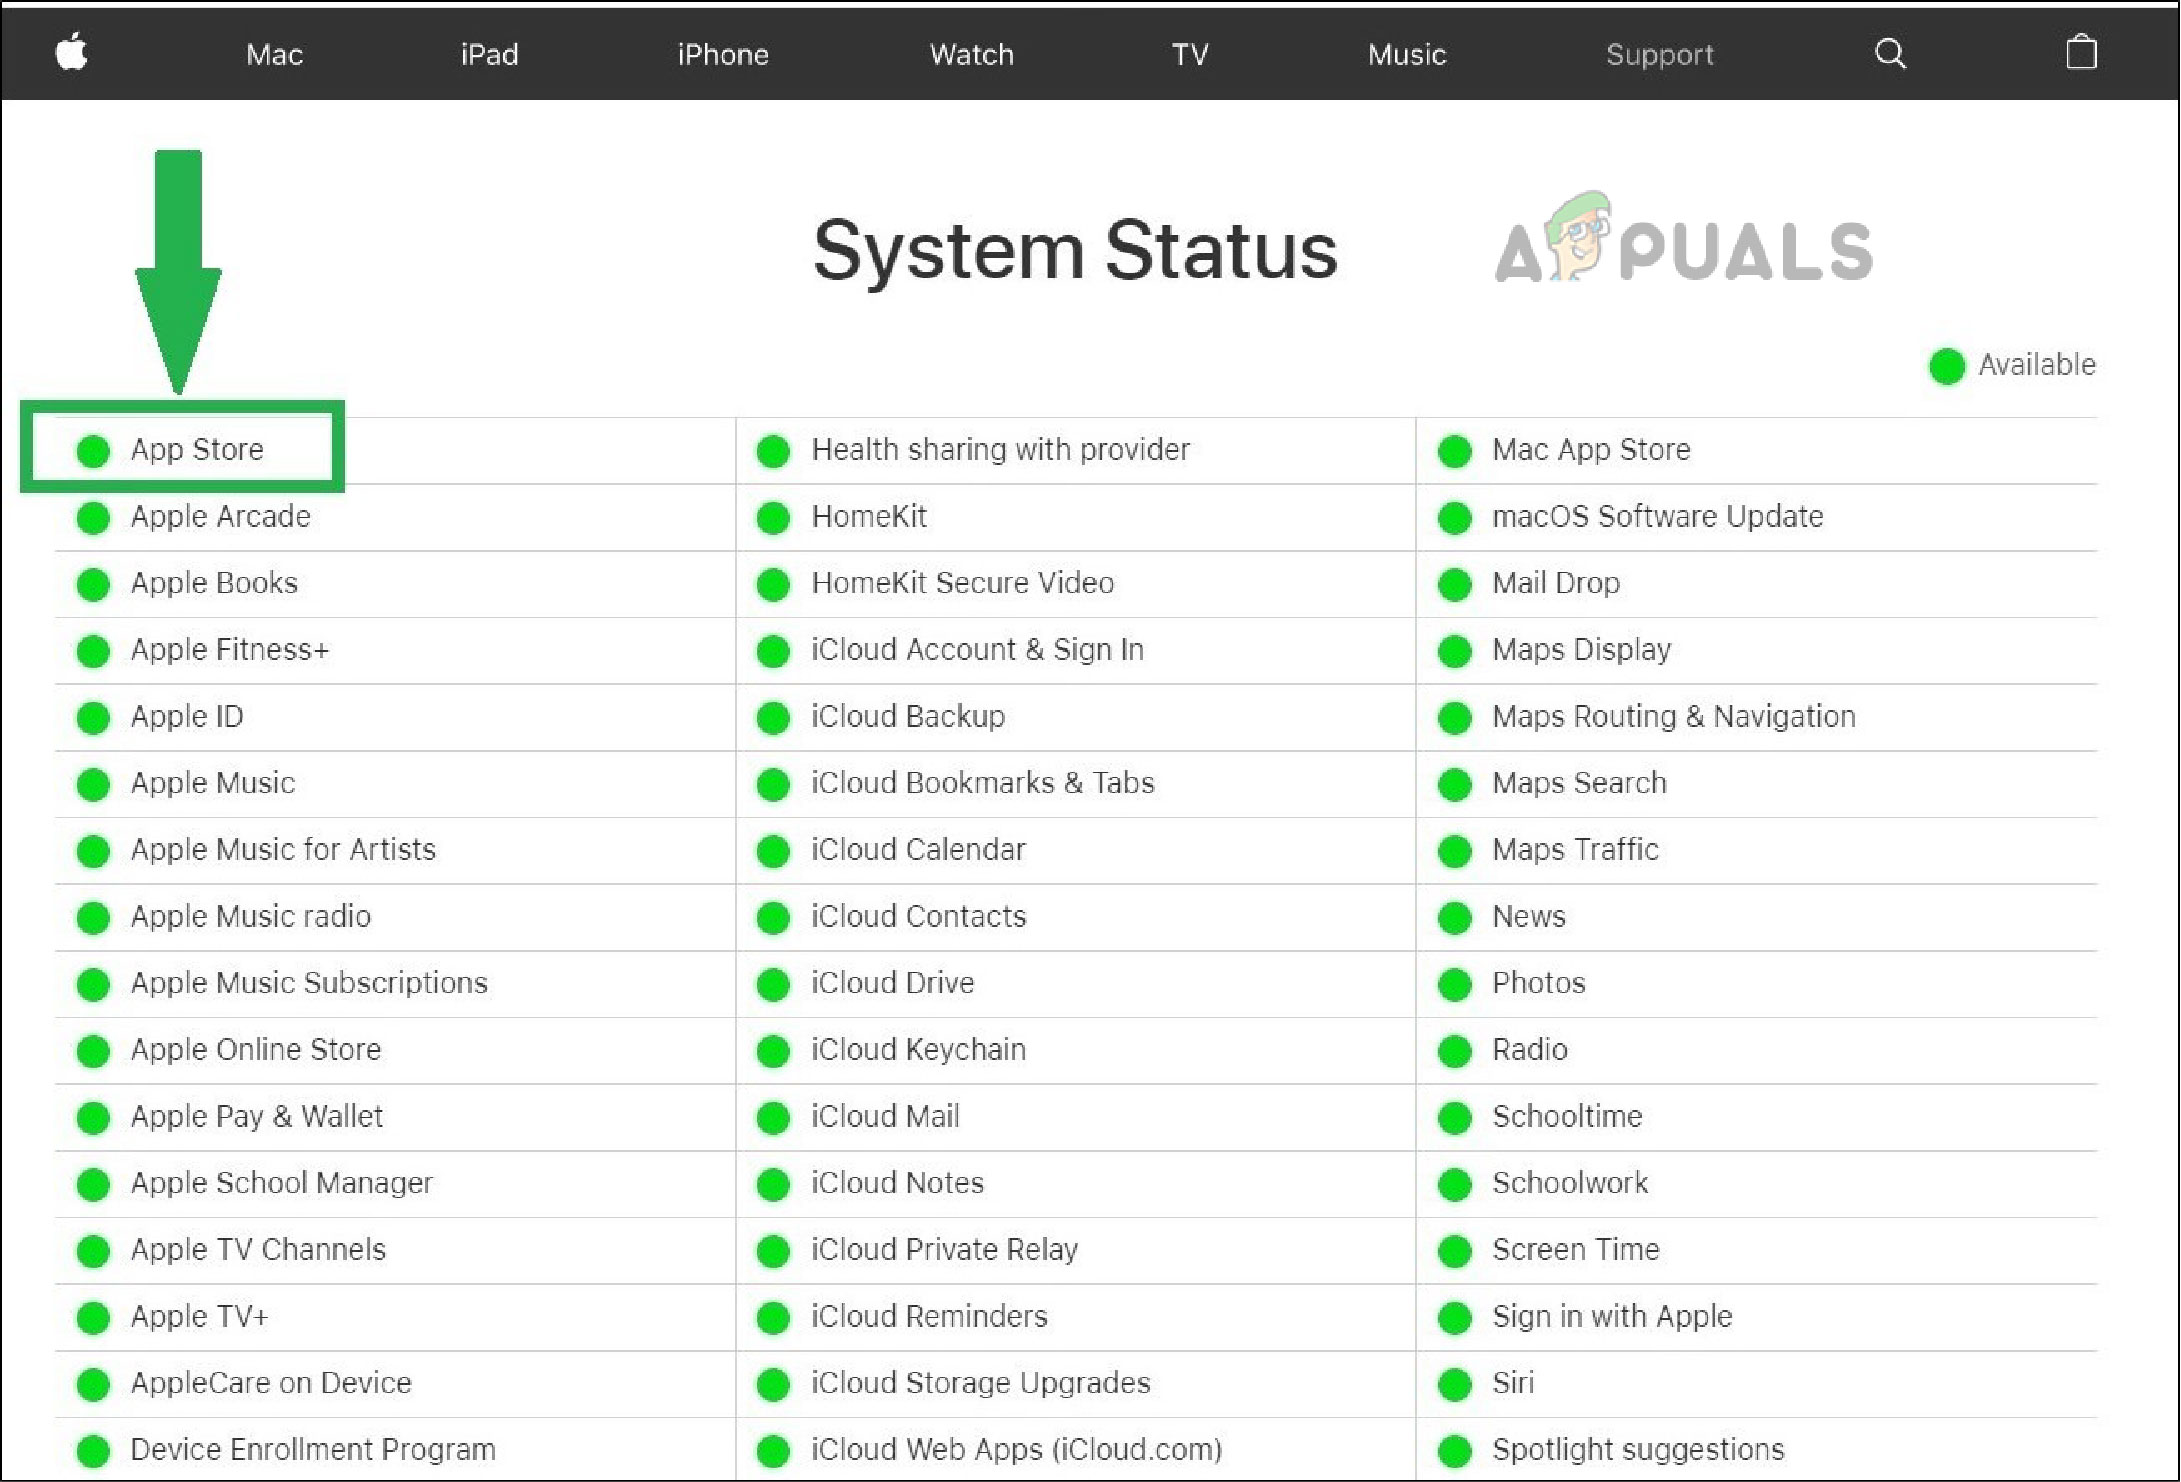 Apple’s system status page